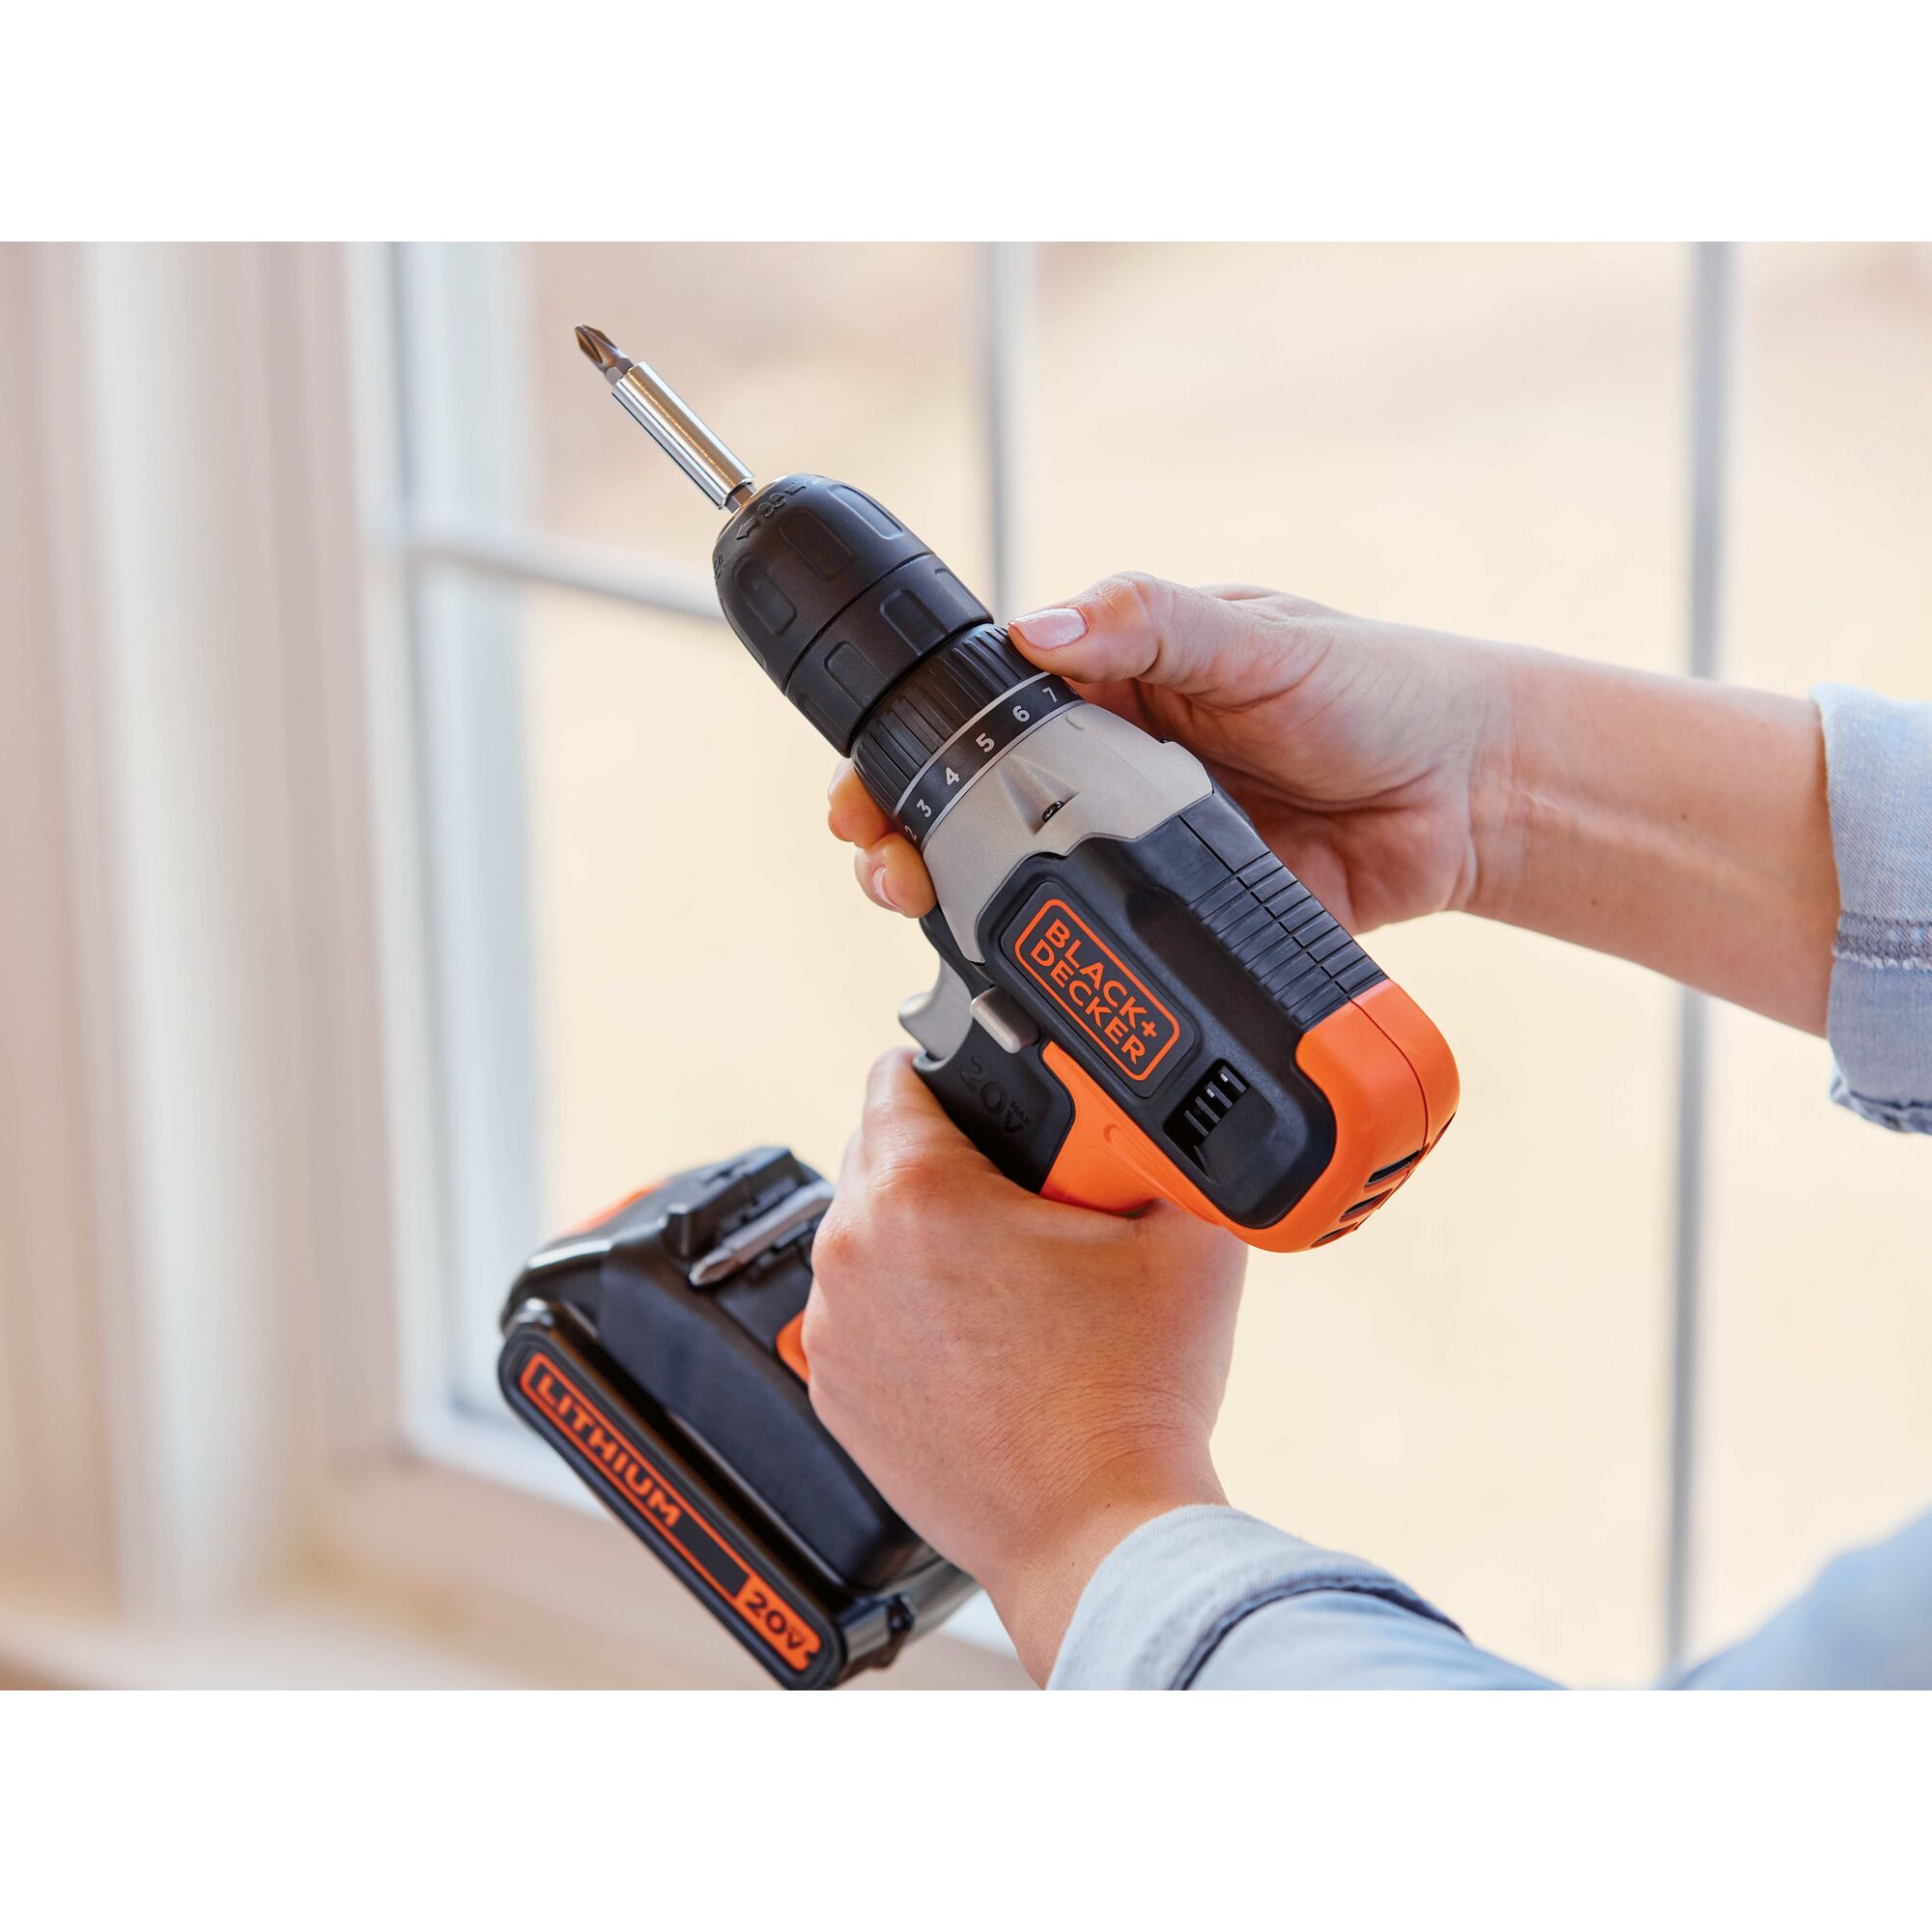 Person adjusting the chuck on a BLACK+DECKER 20 volt max drill driver that has a screwdriving bit in it